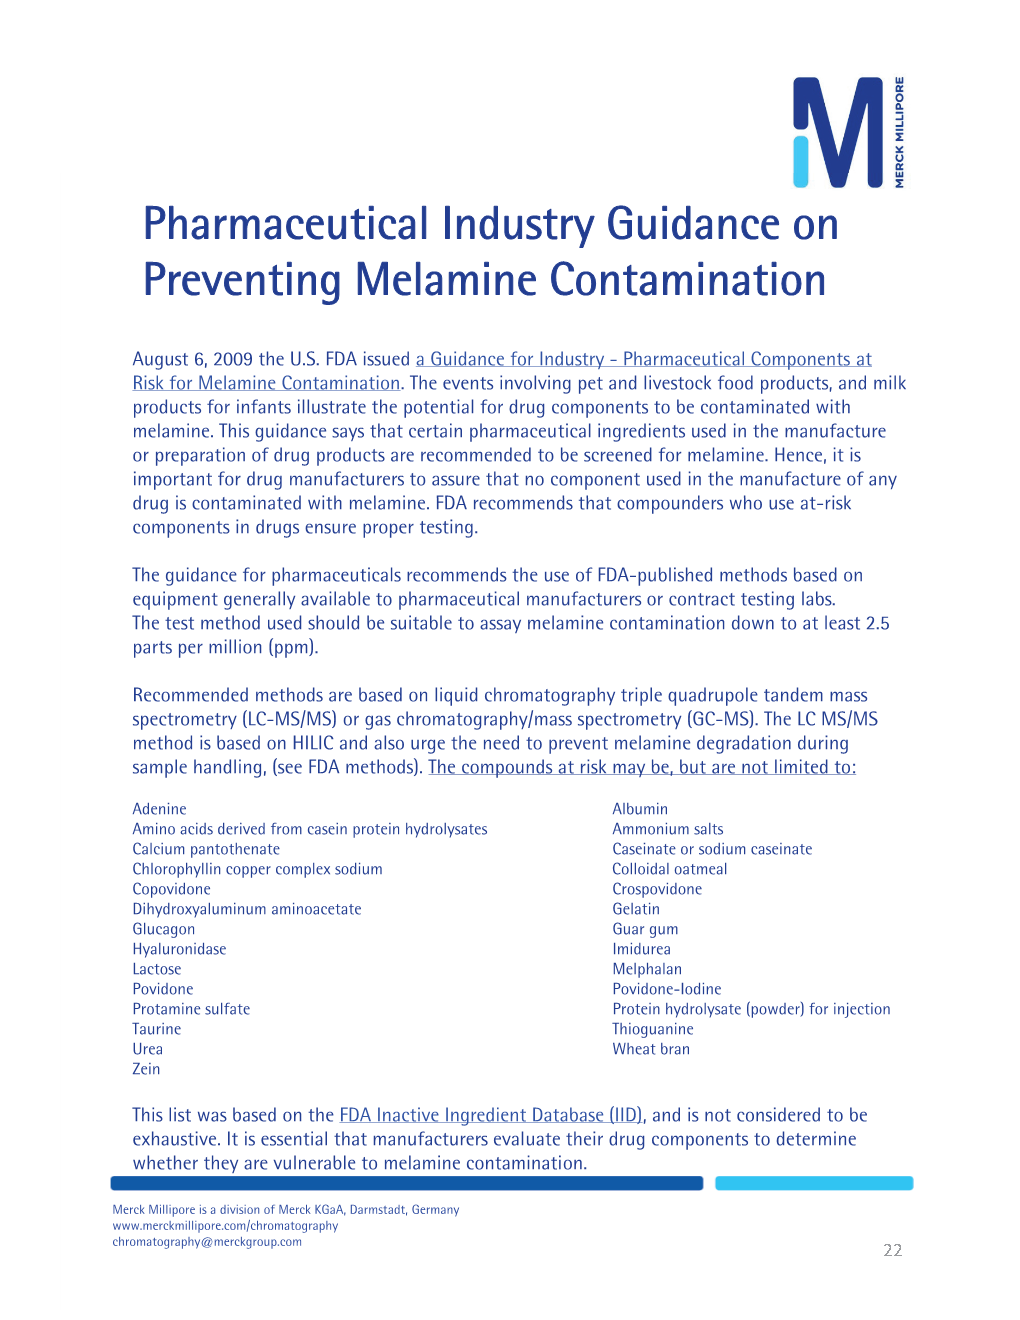 Pharmaceutical Industry Guidance on Preventing Melamine Contamination